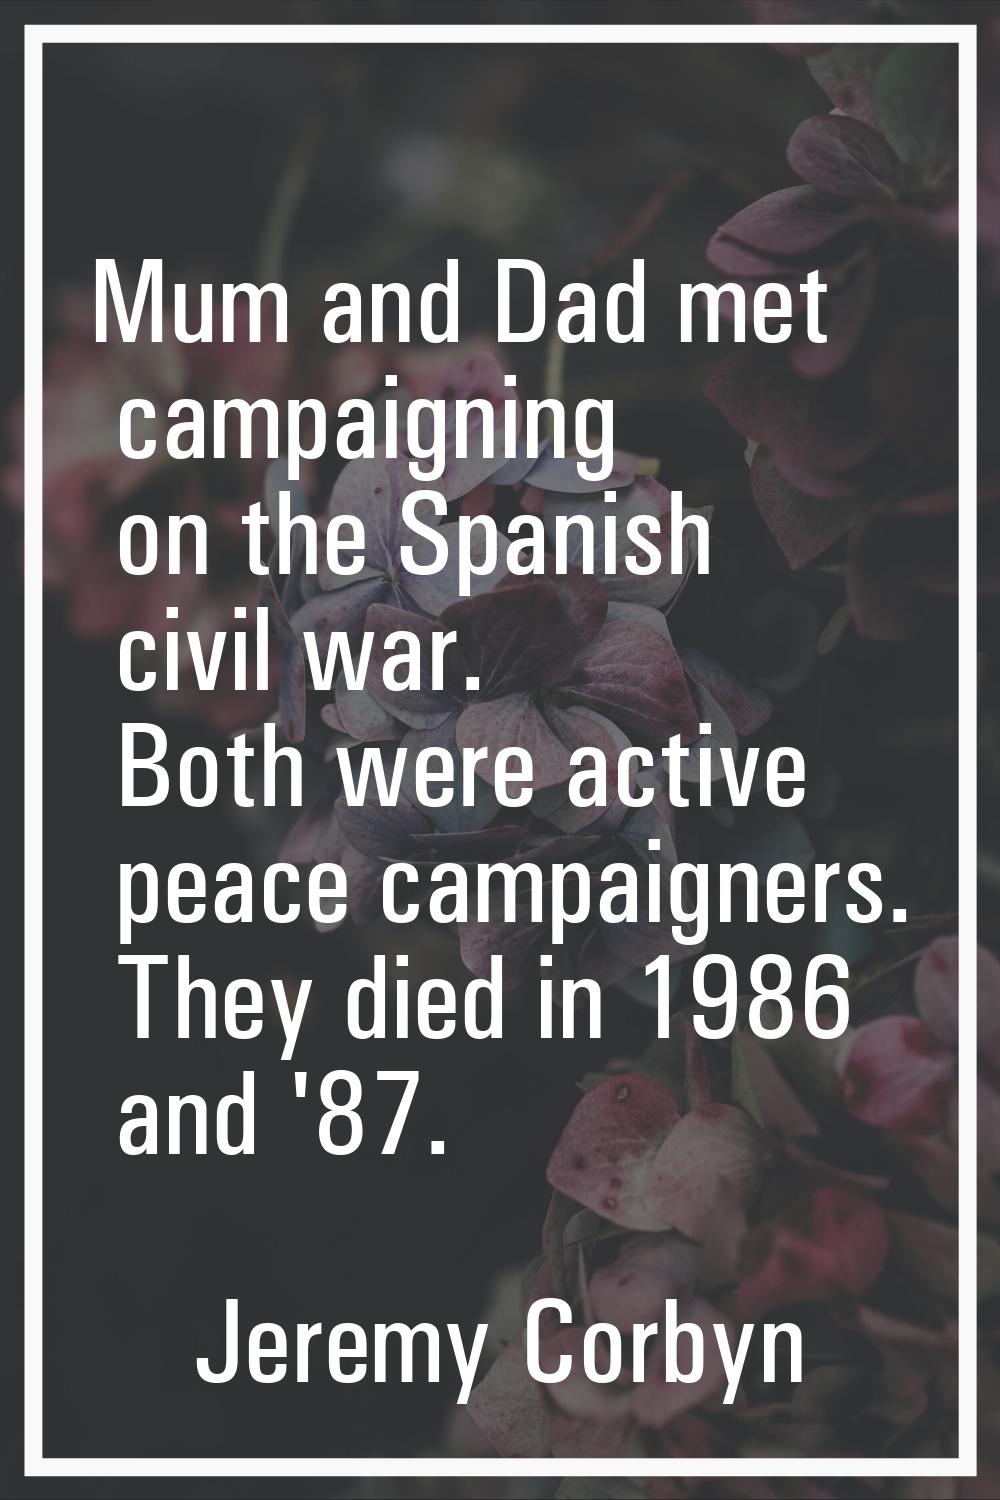 Mum and Dad met campaigning on the Spanish civil war. Both were active peace campaigners. They died